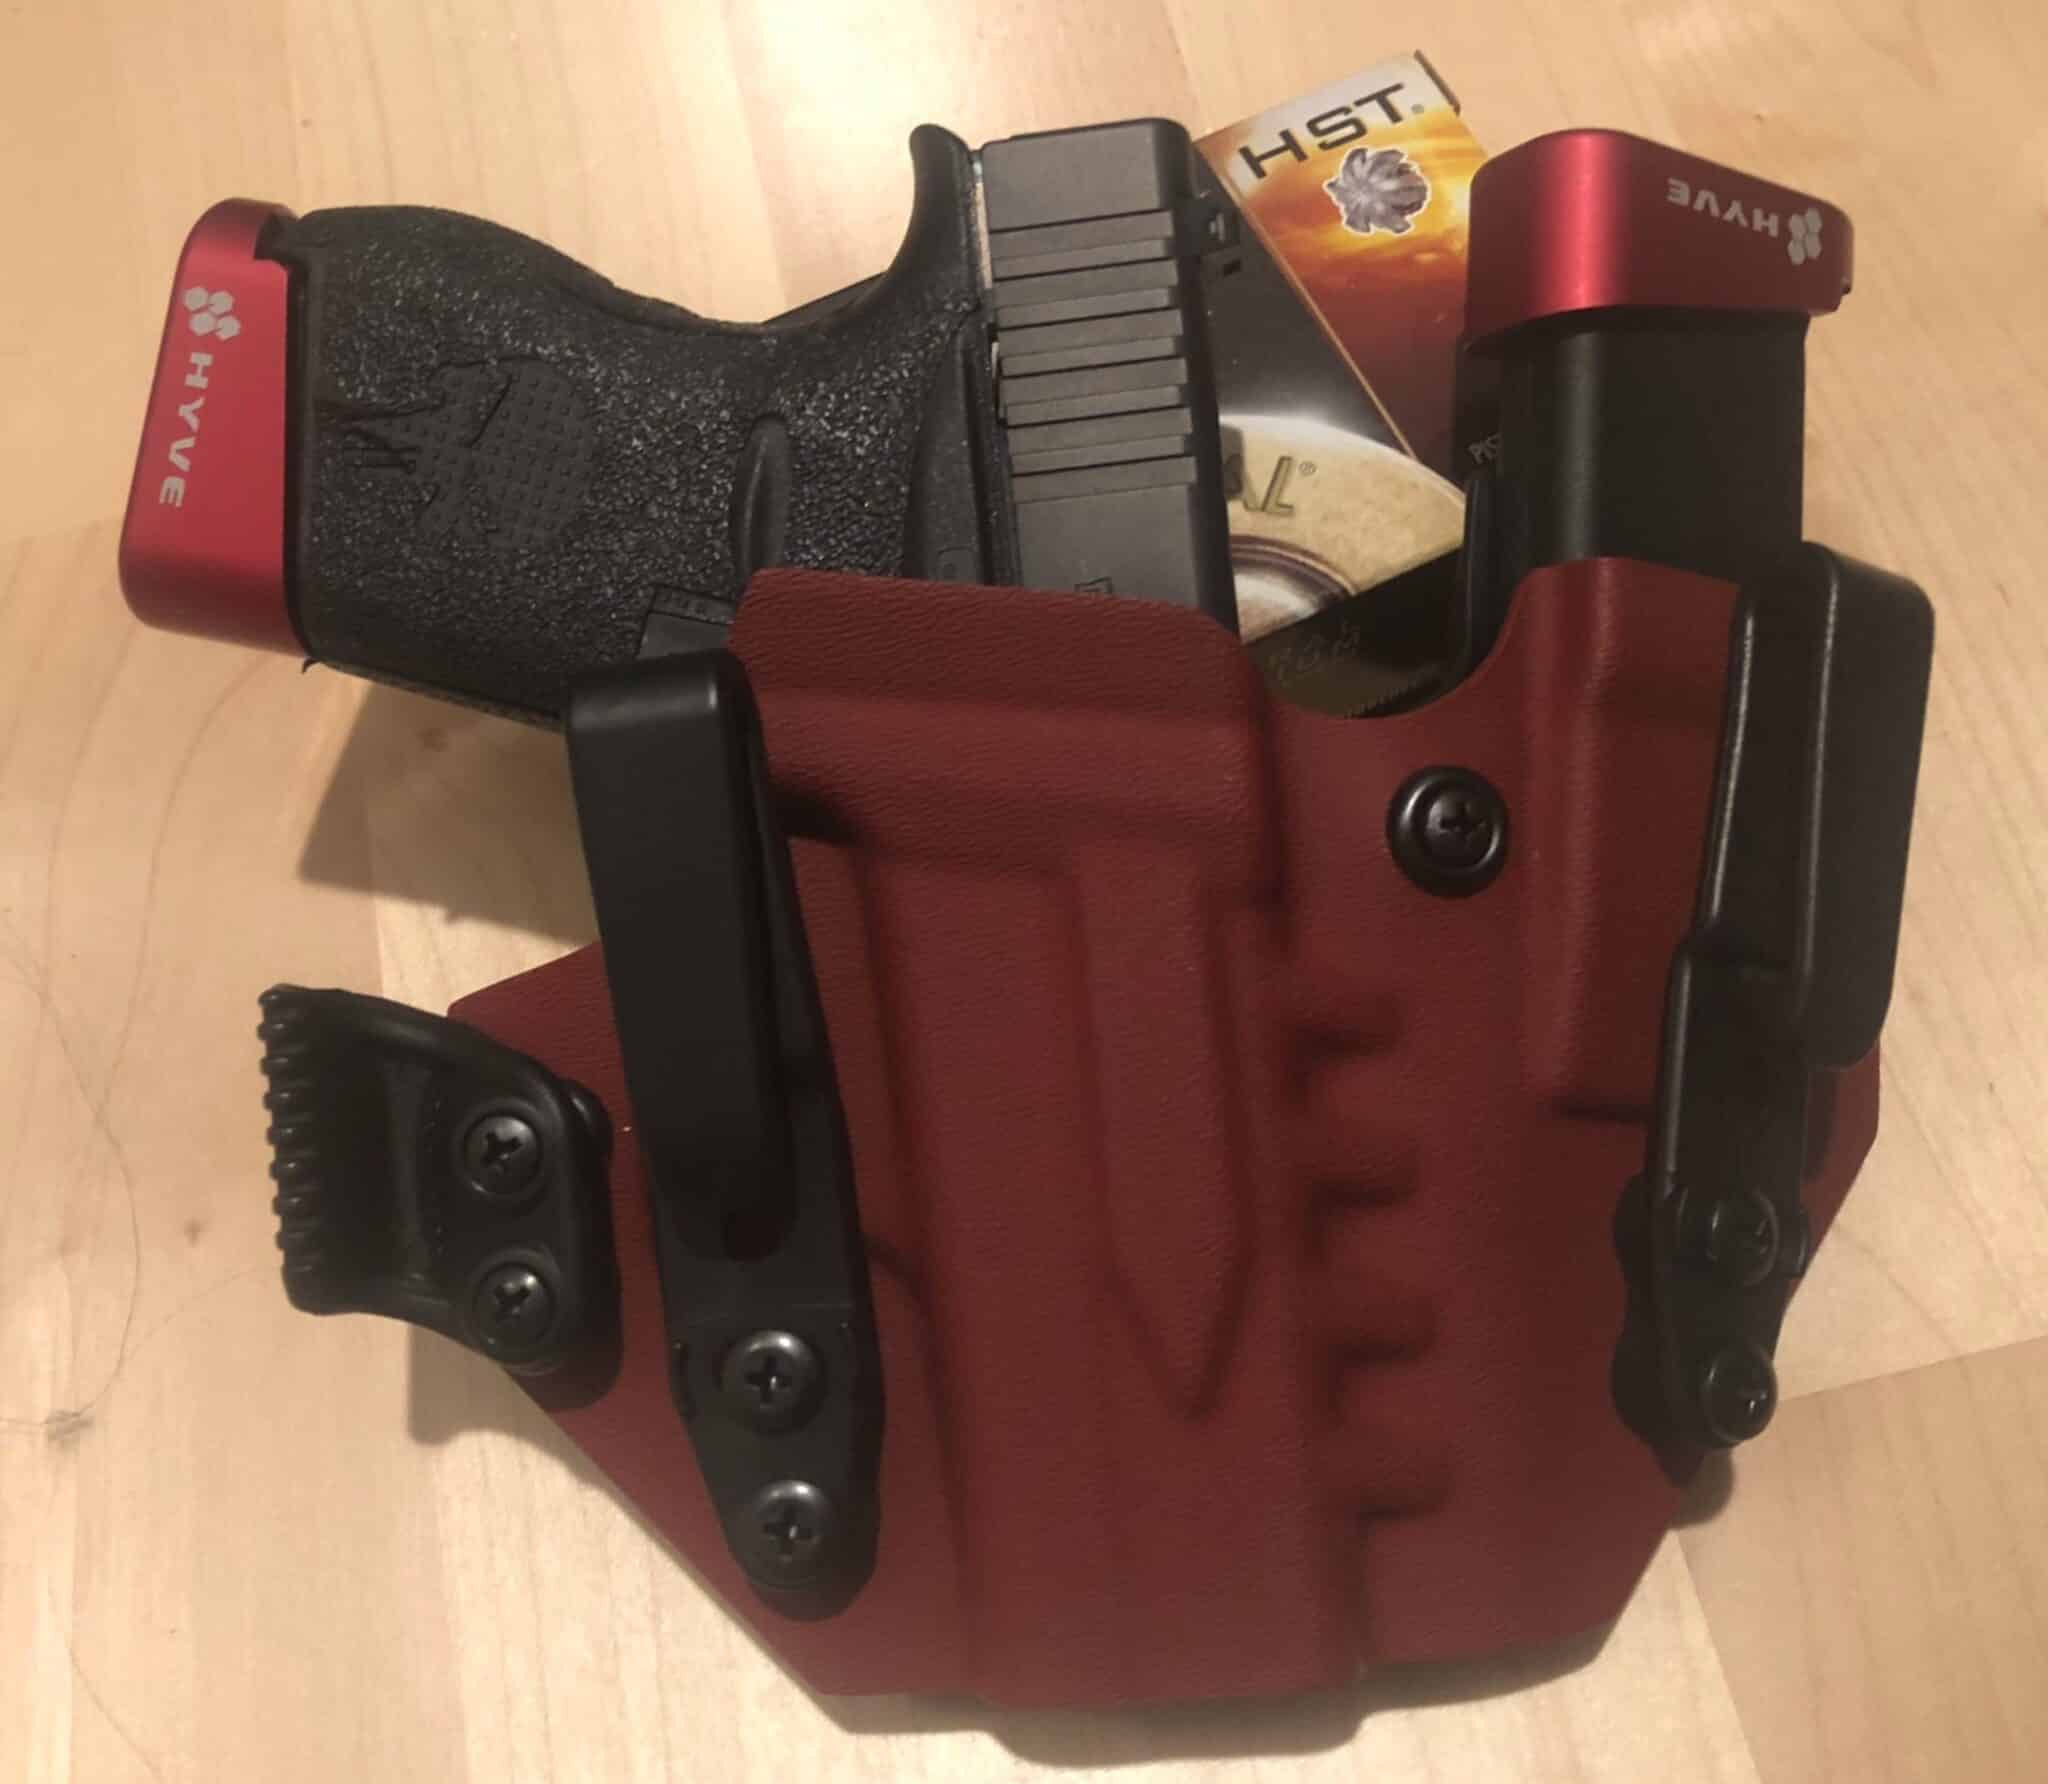 #DIGTHERIG – Petros and his GLOCK 43 in a TucTite Annex Holster